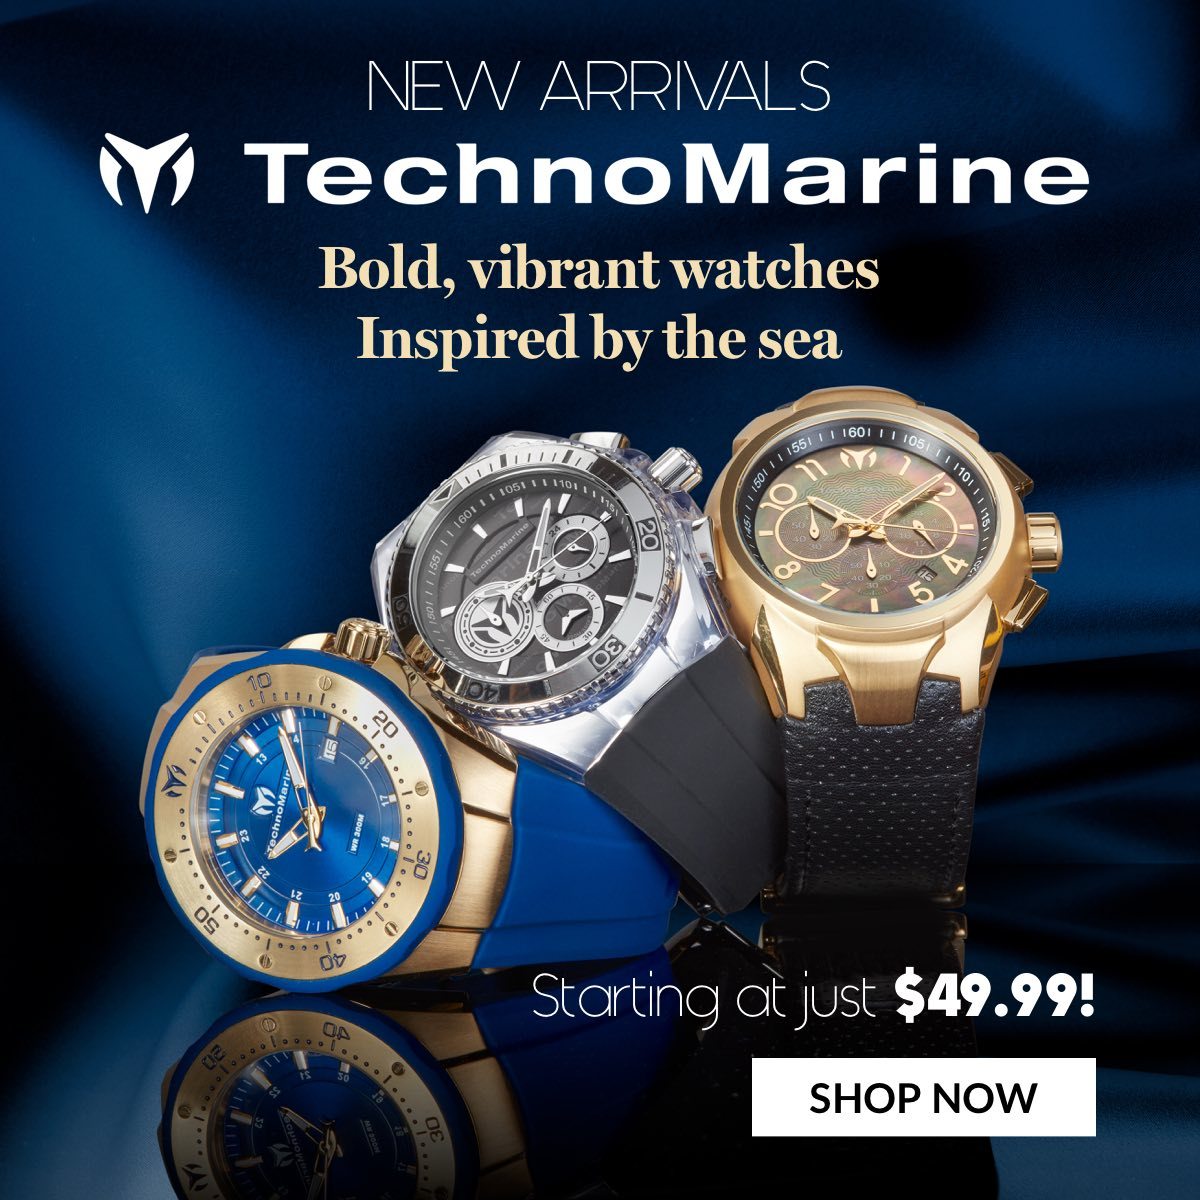 New Arrivals: TechnoMarine Bold, Vibrant Watches Inspired by the Sea Starting at just $49.99!